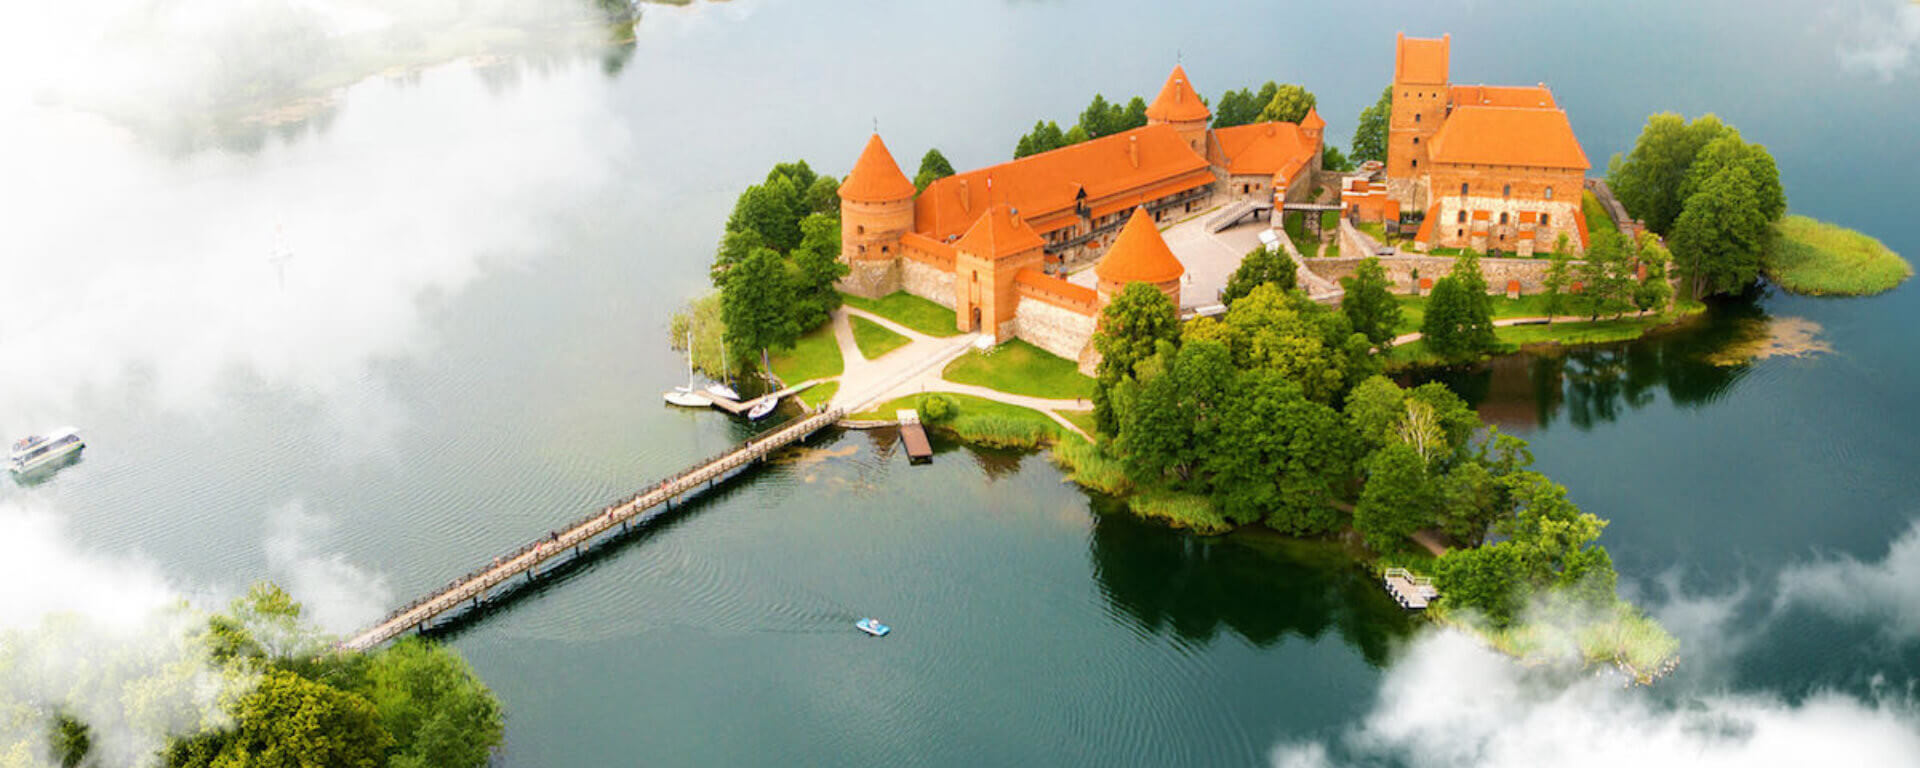 Lithuania Tourist Attractions